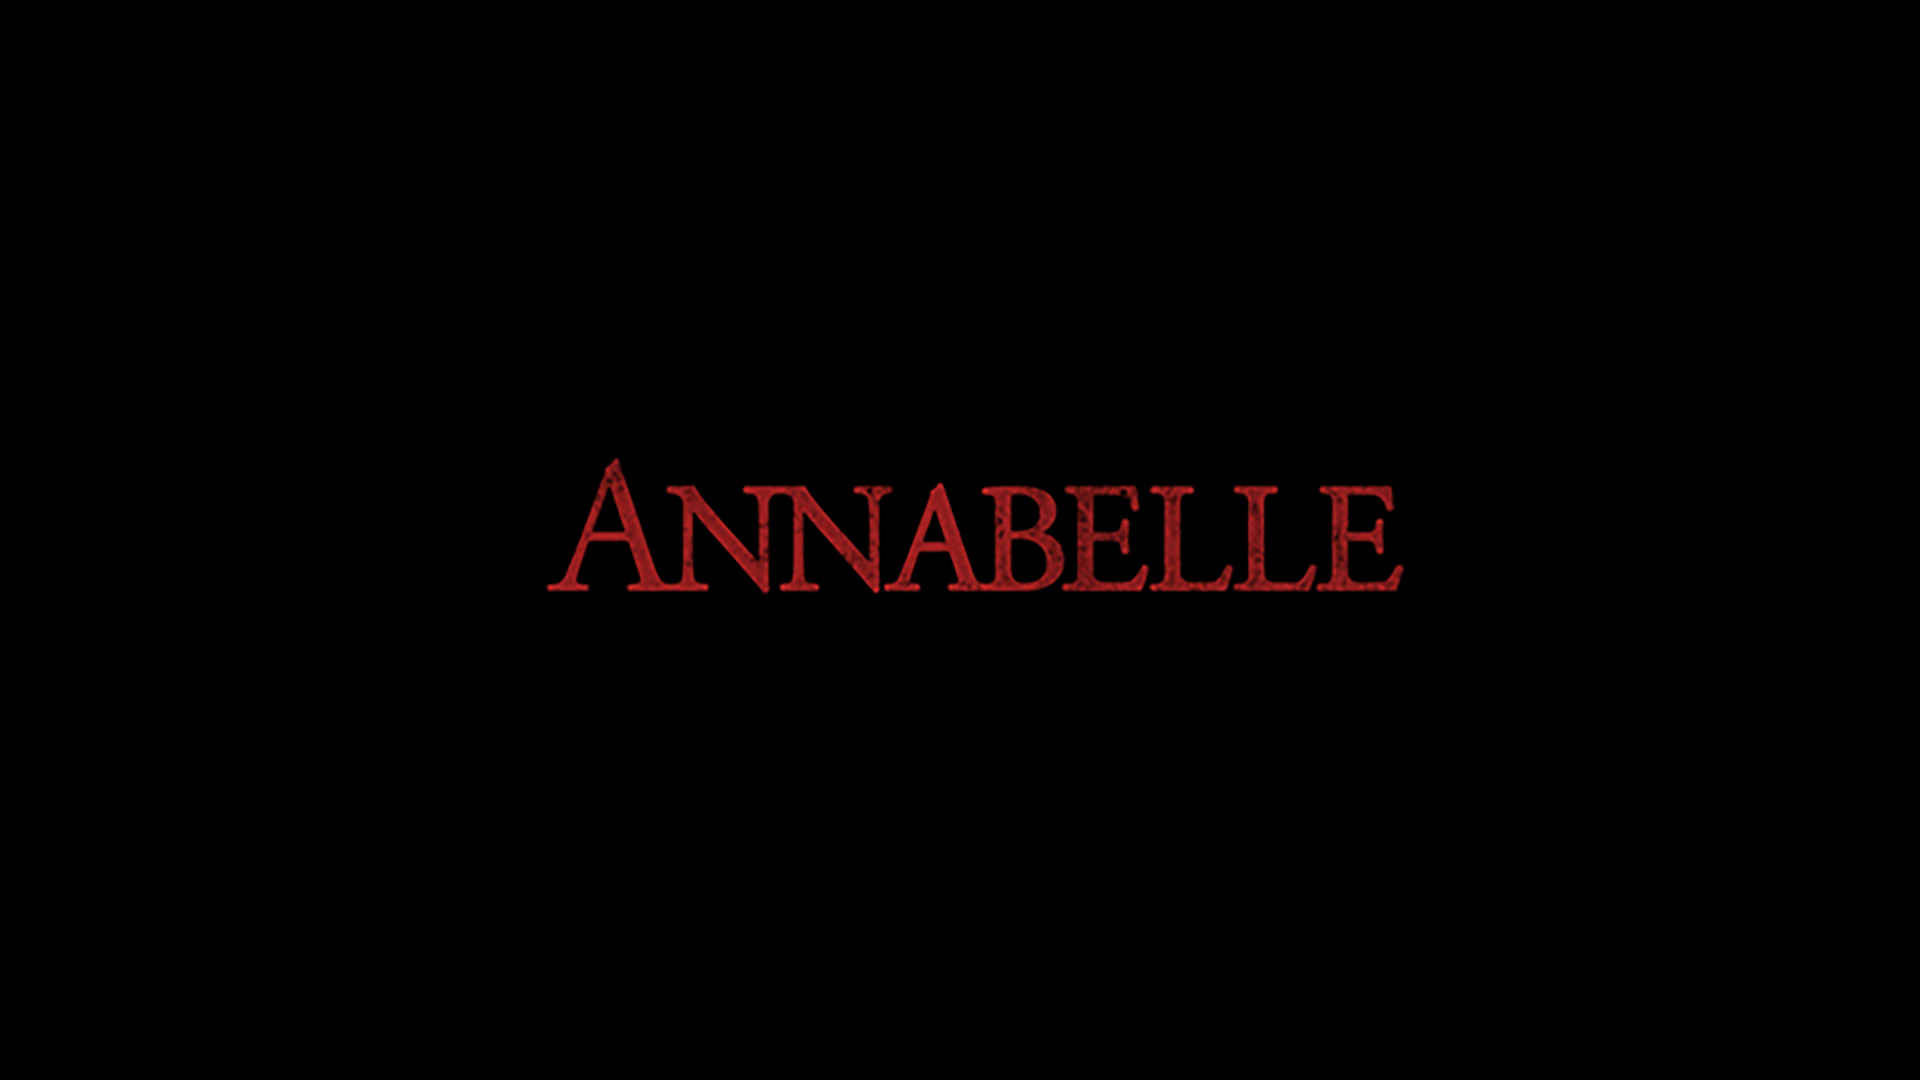 Annabelle Text In Black Wallpaper